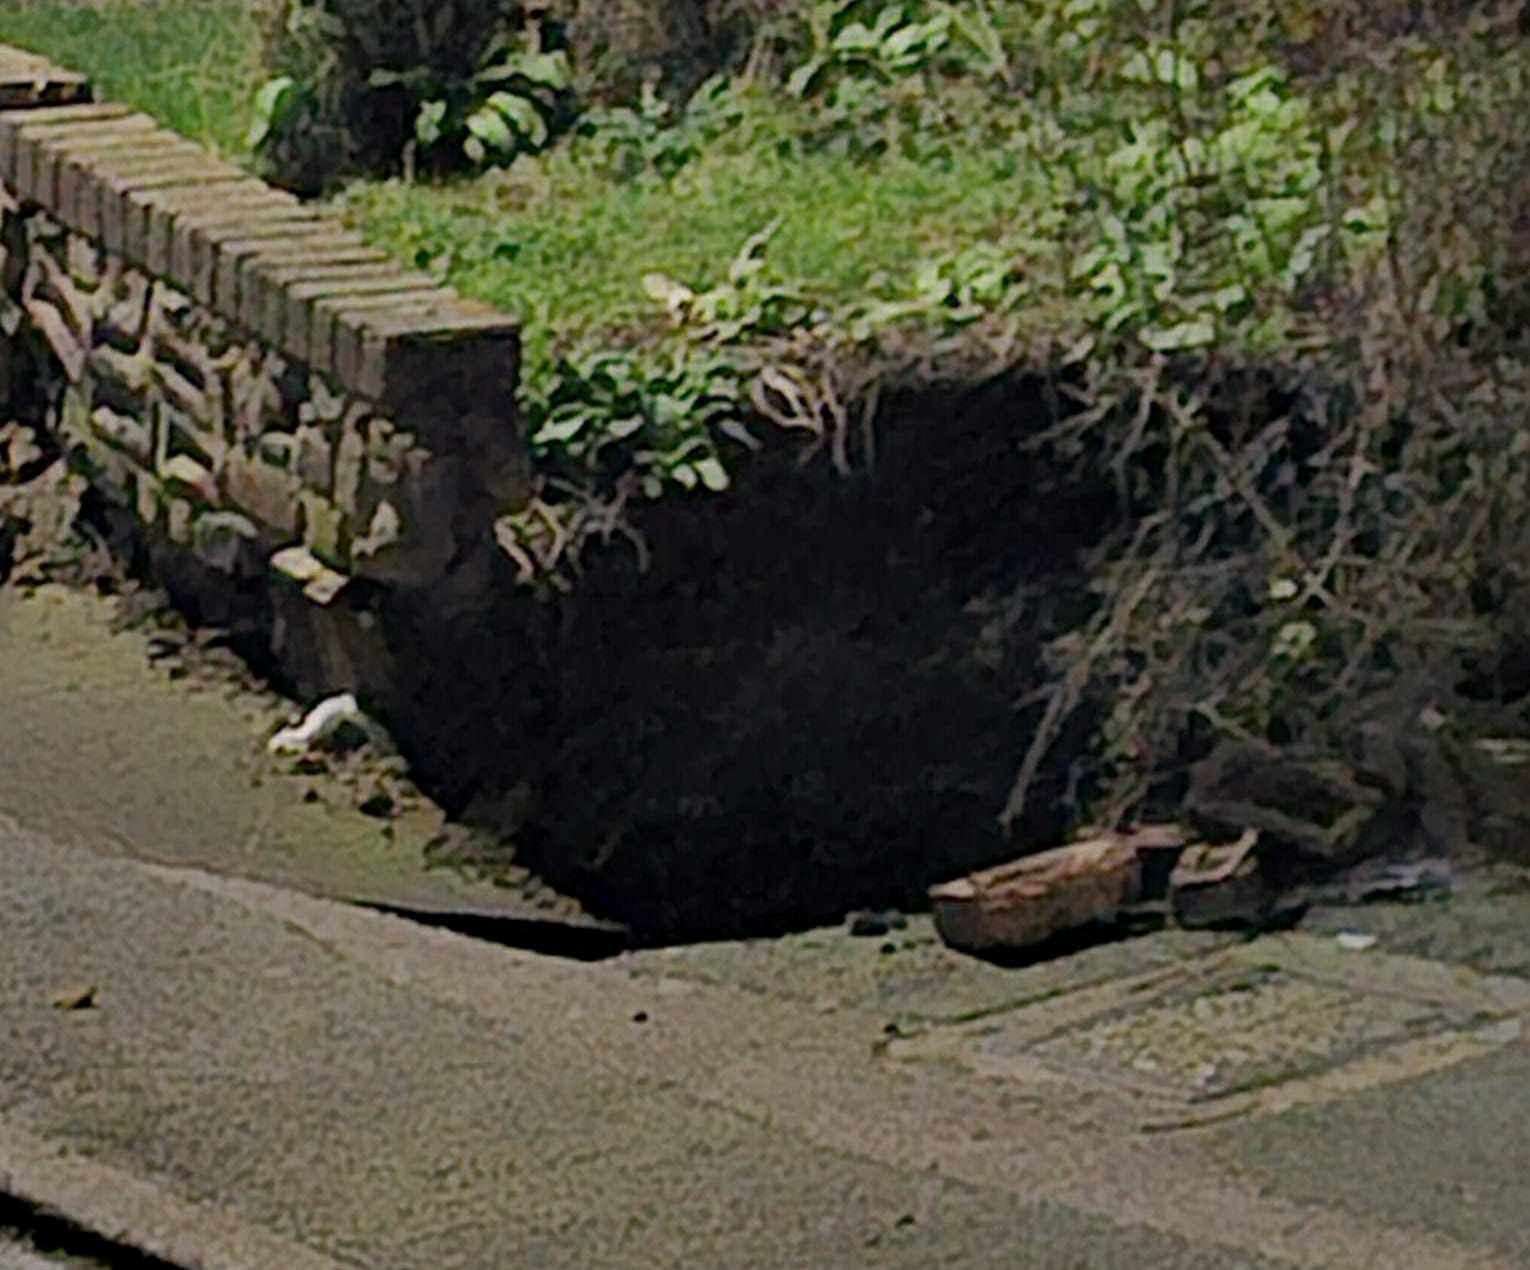 It started as a smaller hole at the side of the road in Church Road, Margate. Photo credit: Darren Gregory